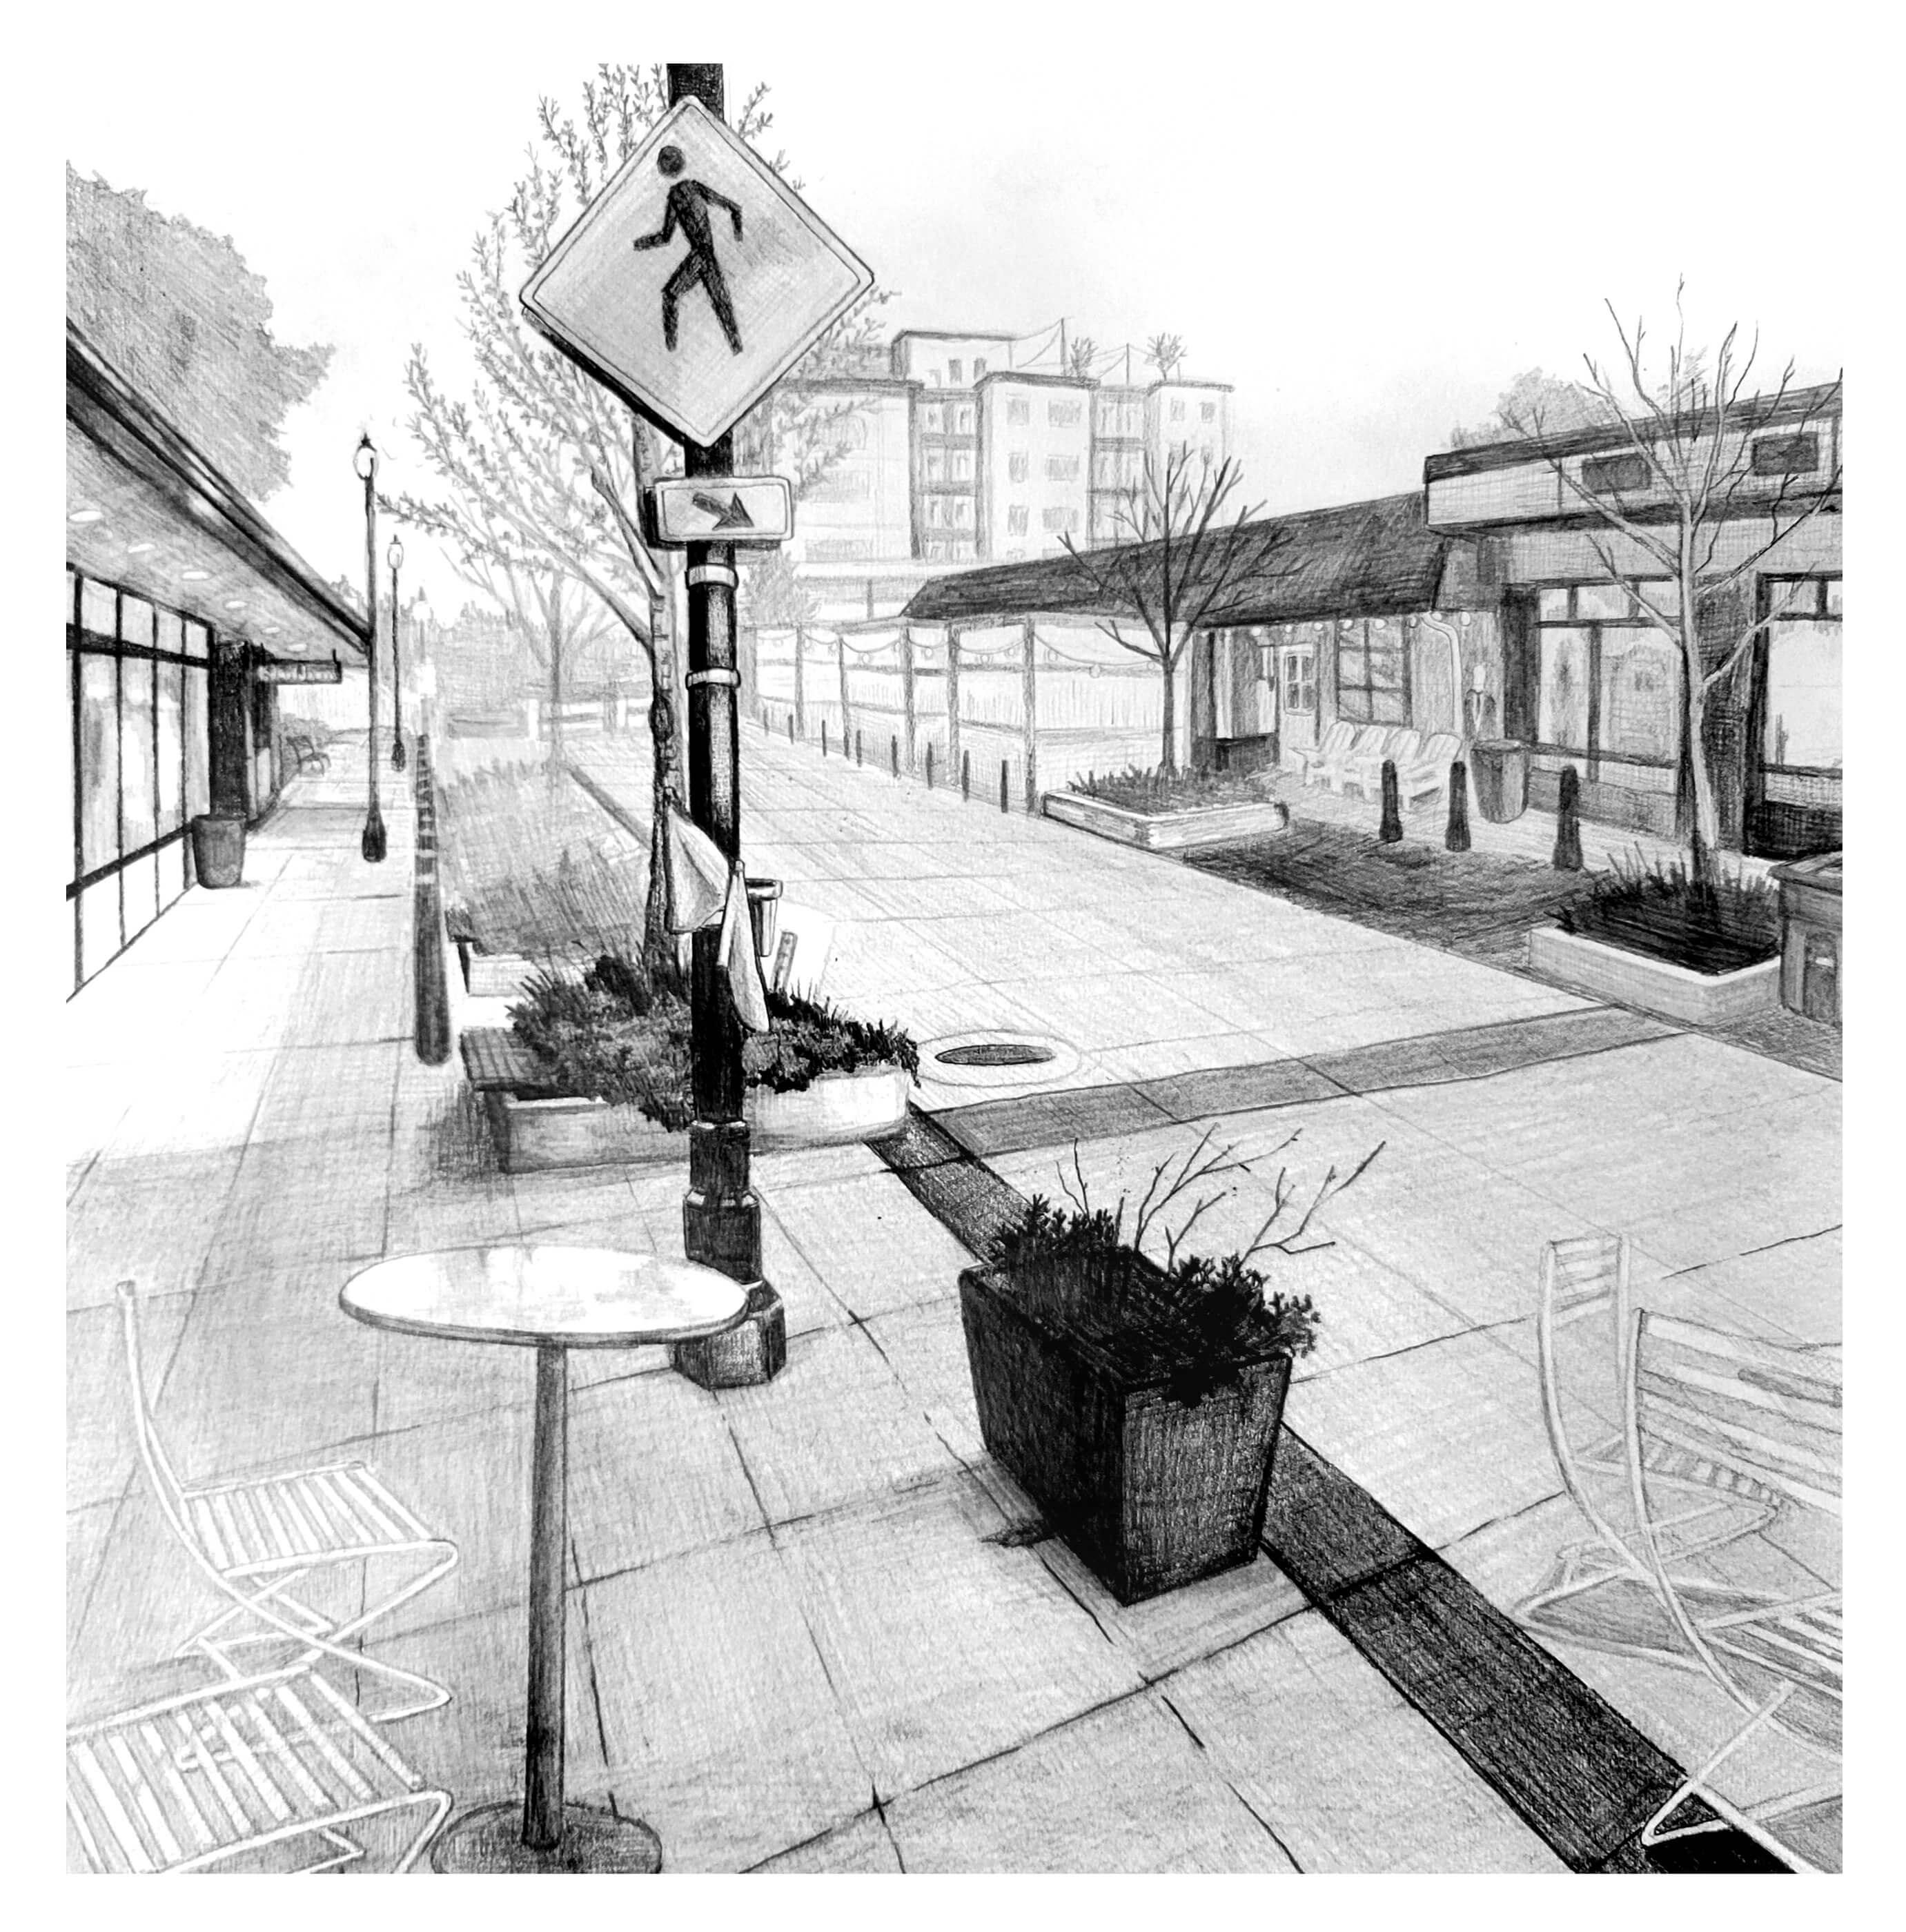 Sketch of a downtown bus stop area.